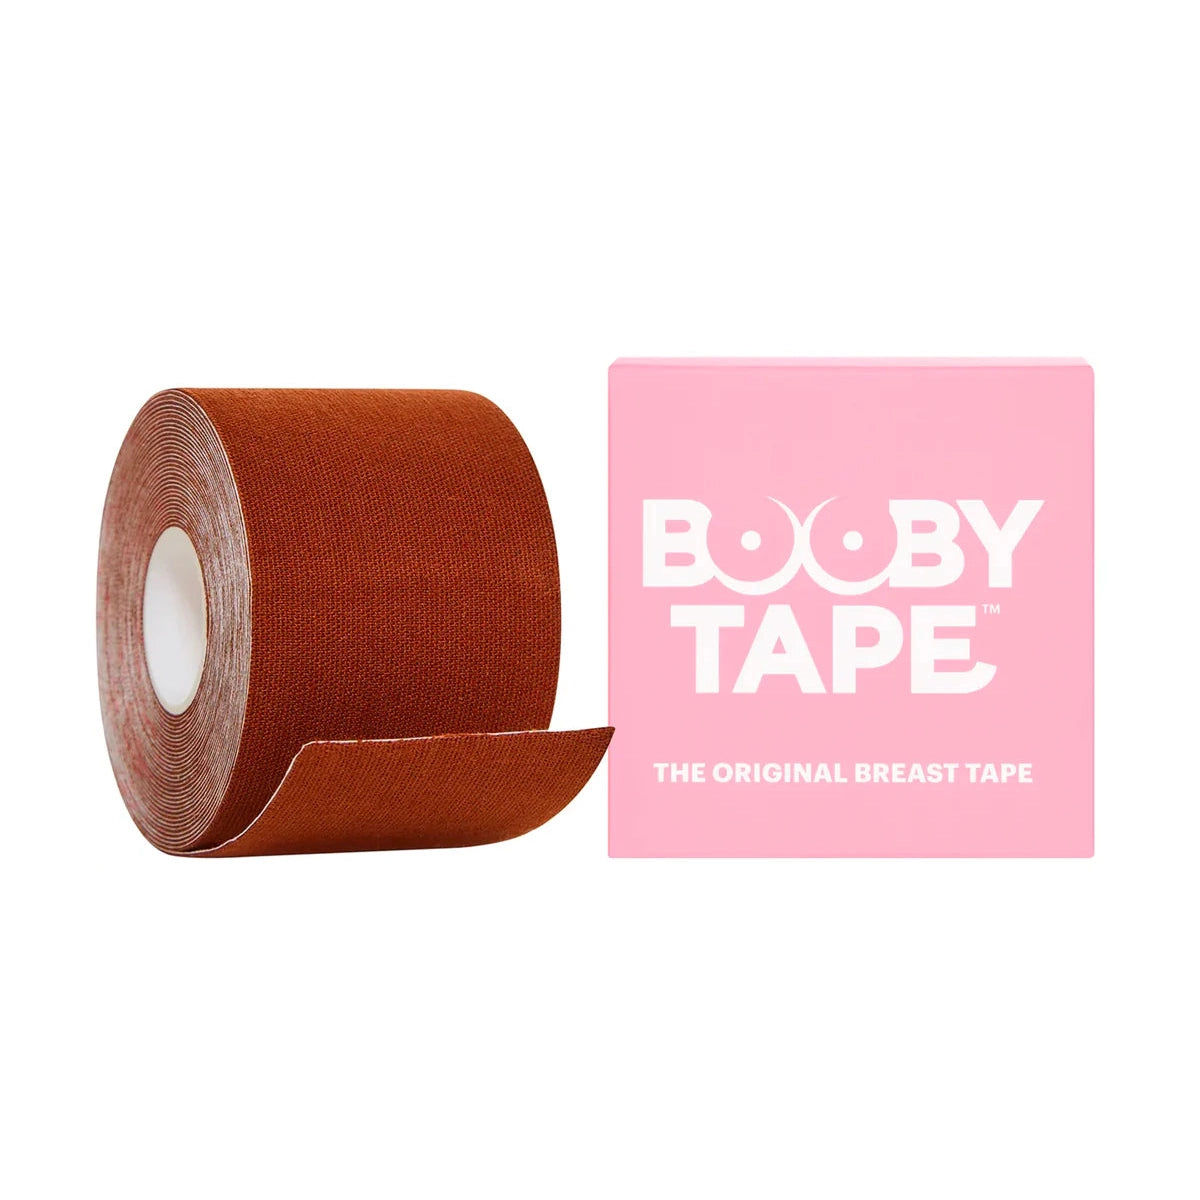 Booby Tape-Booby Tape-1000 Palms